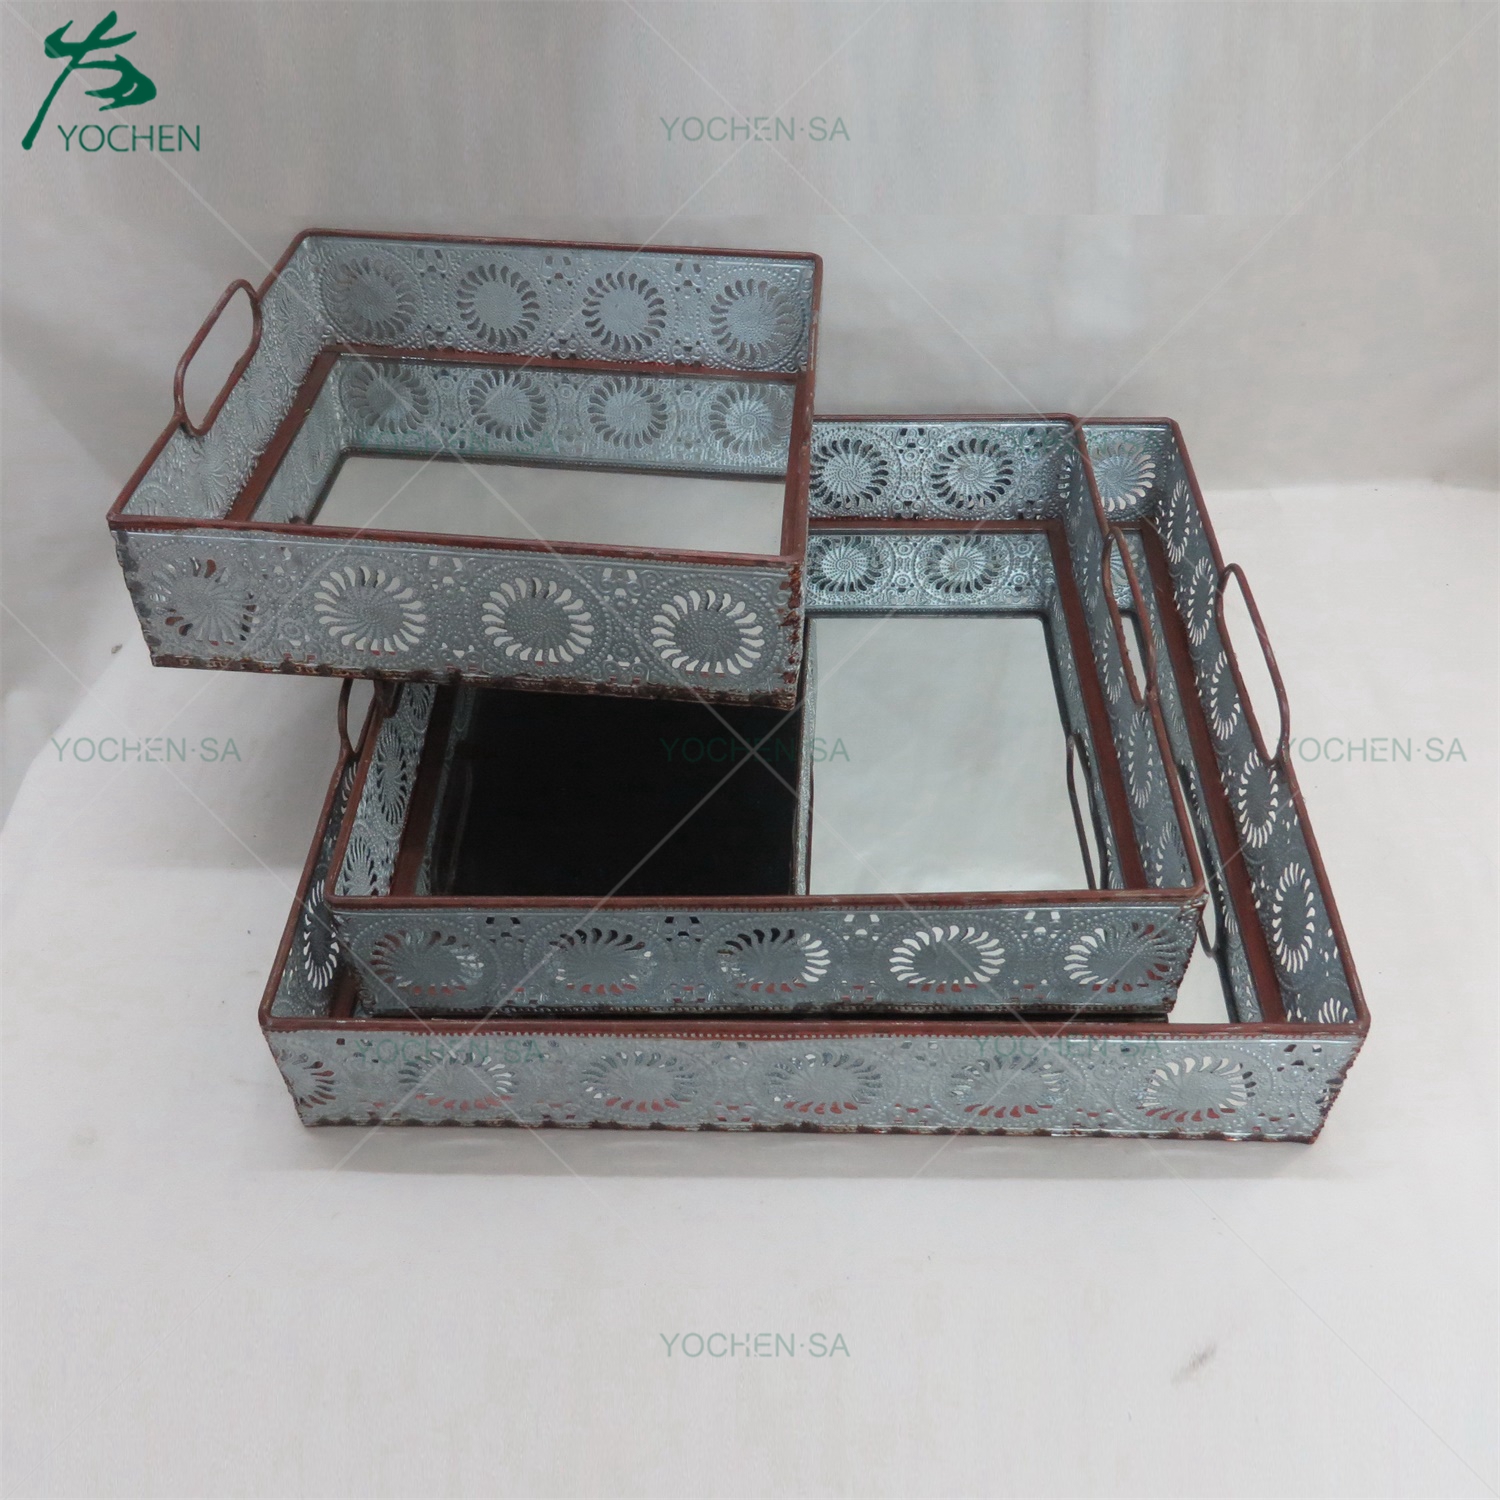 Sexangle Shaped Metal Mirrored Serving Tray Home Decorative Tray